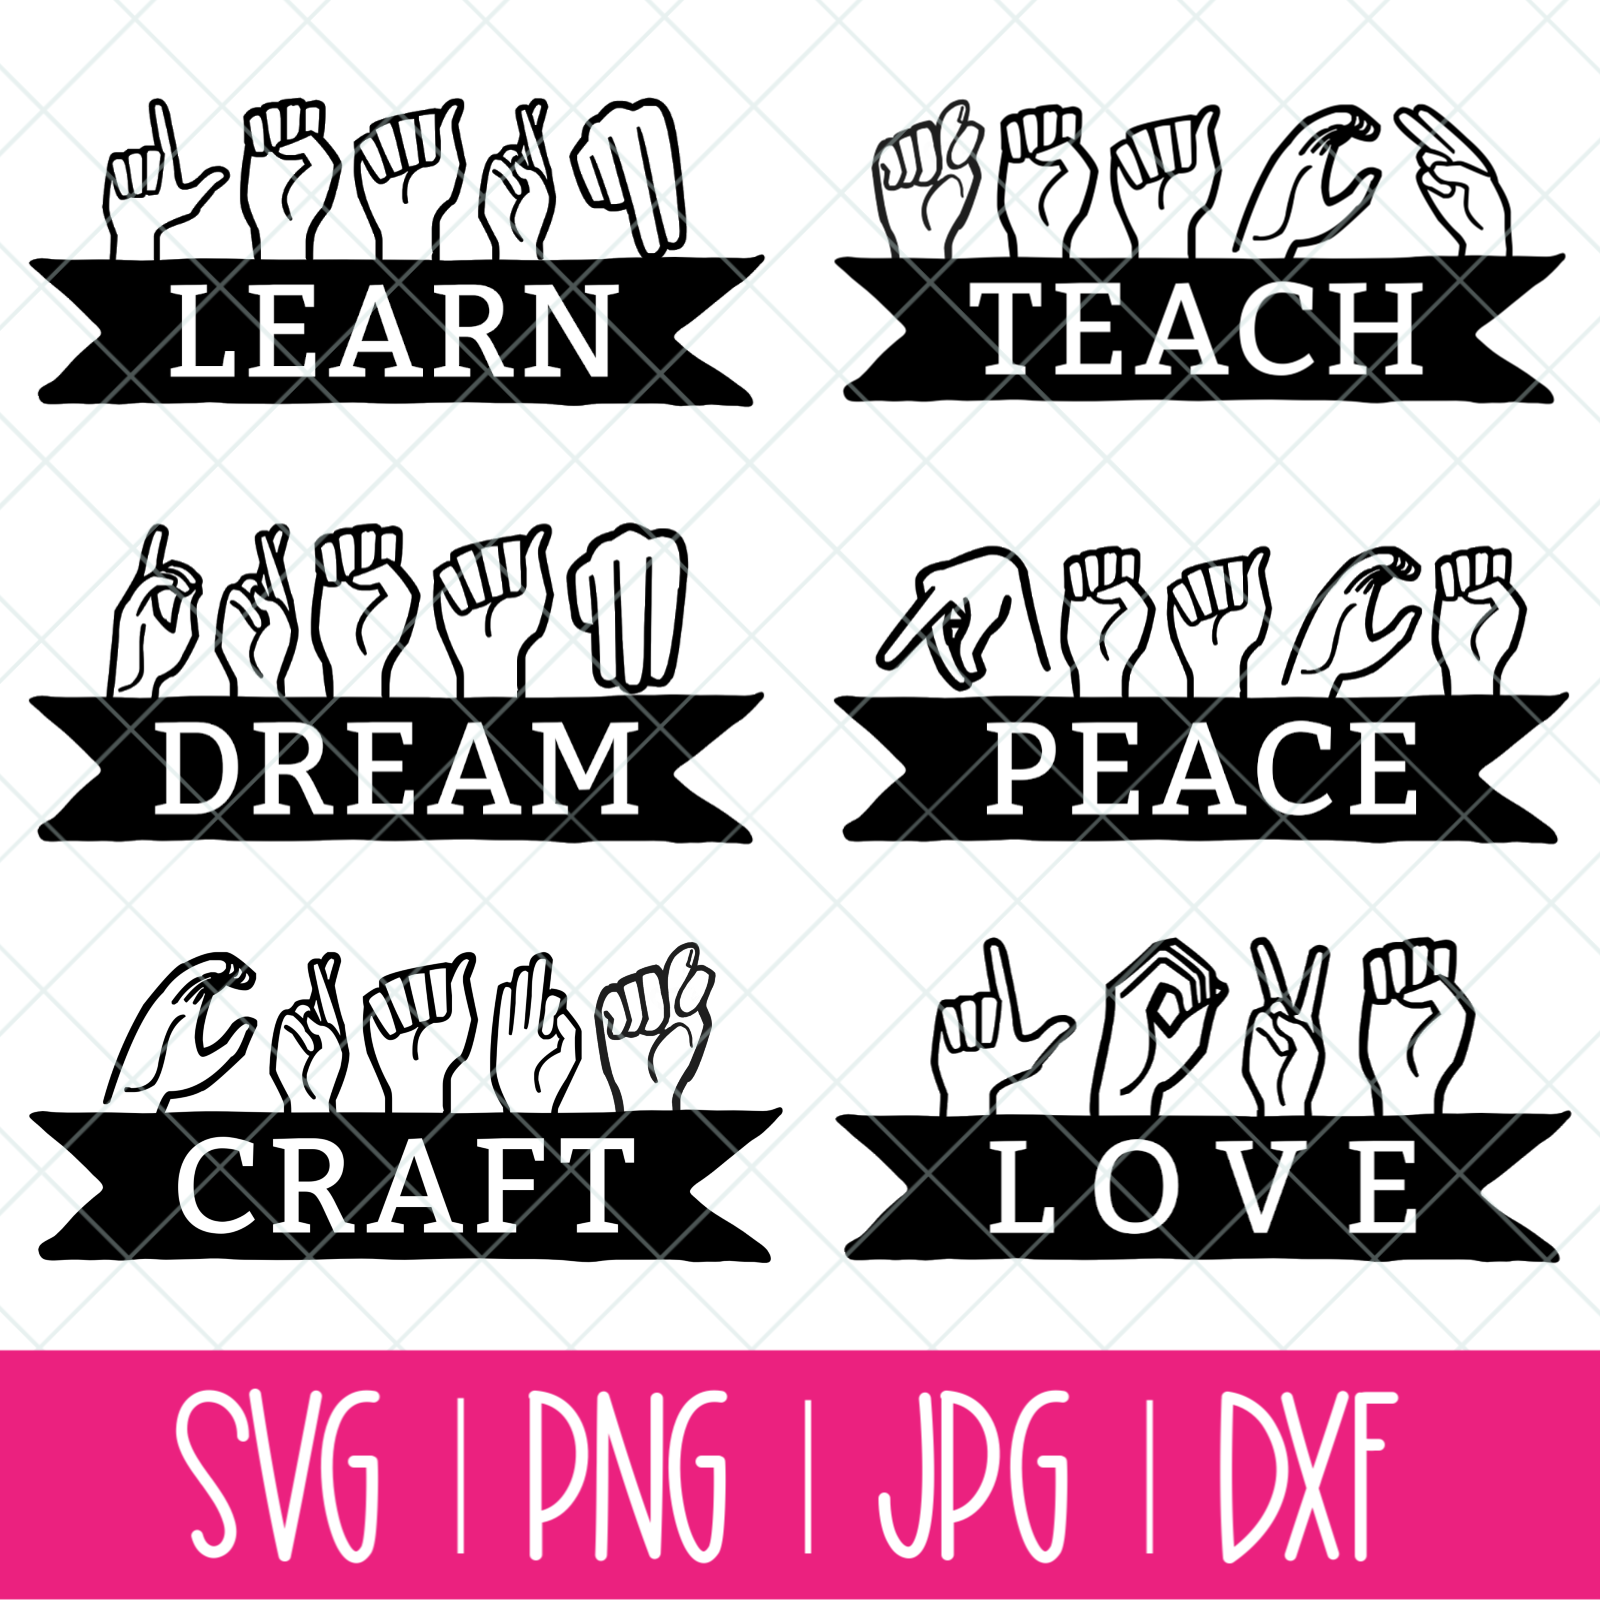 Download 6 Inspiring Asl Words Svg Includes Love Dream Teach Learn Craft And Peace PSD Mockup Templates